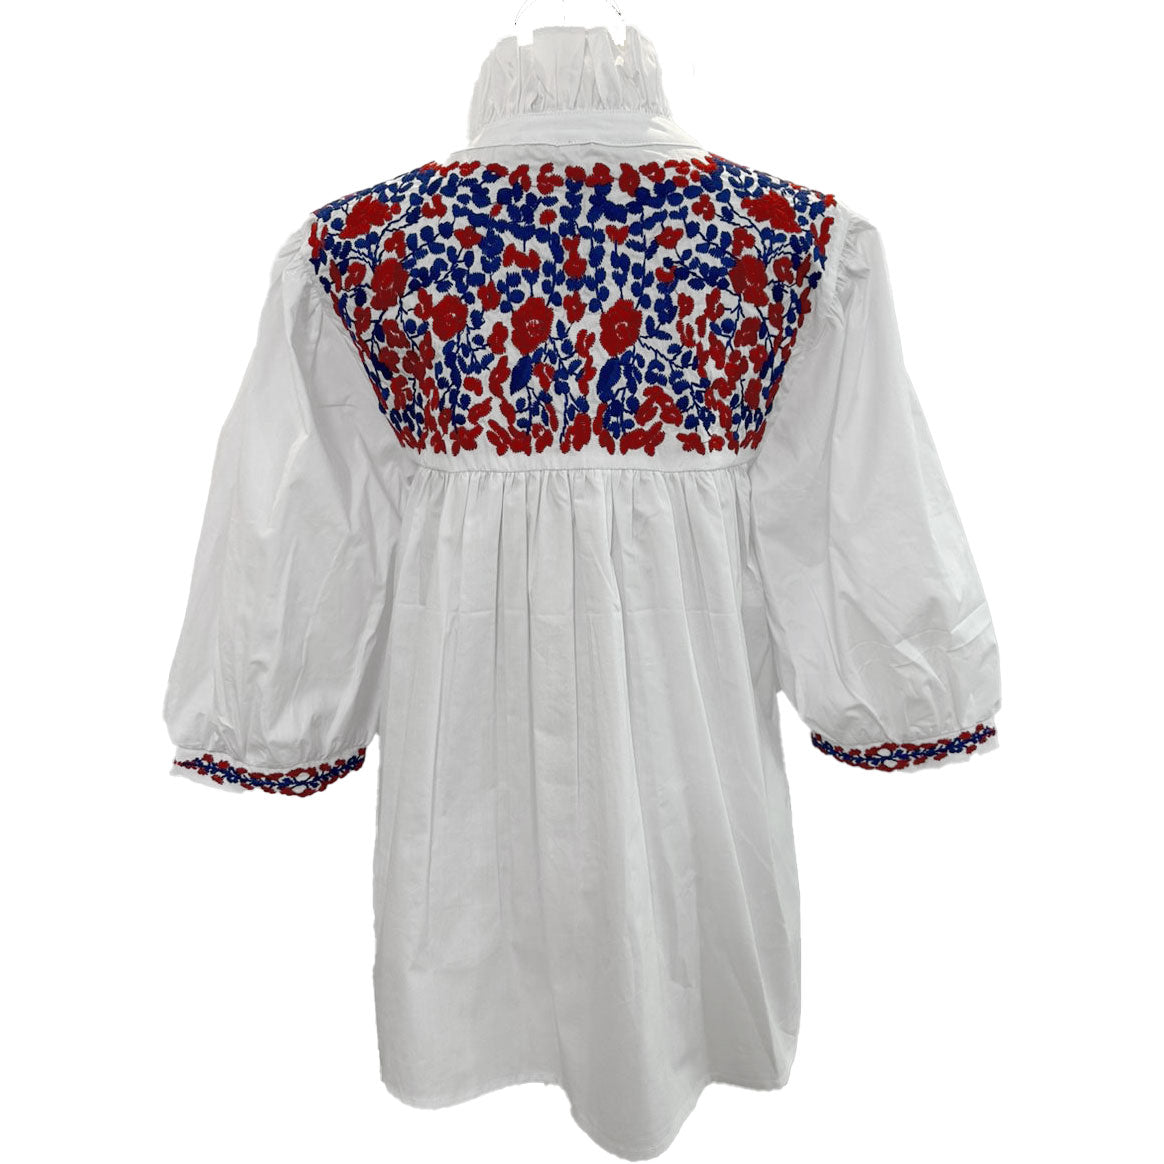 PRE-ORDER: Fourth of July White Tailgater Blouse (mid-June delivery)